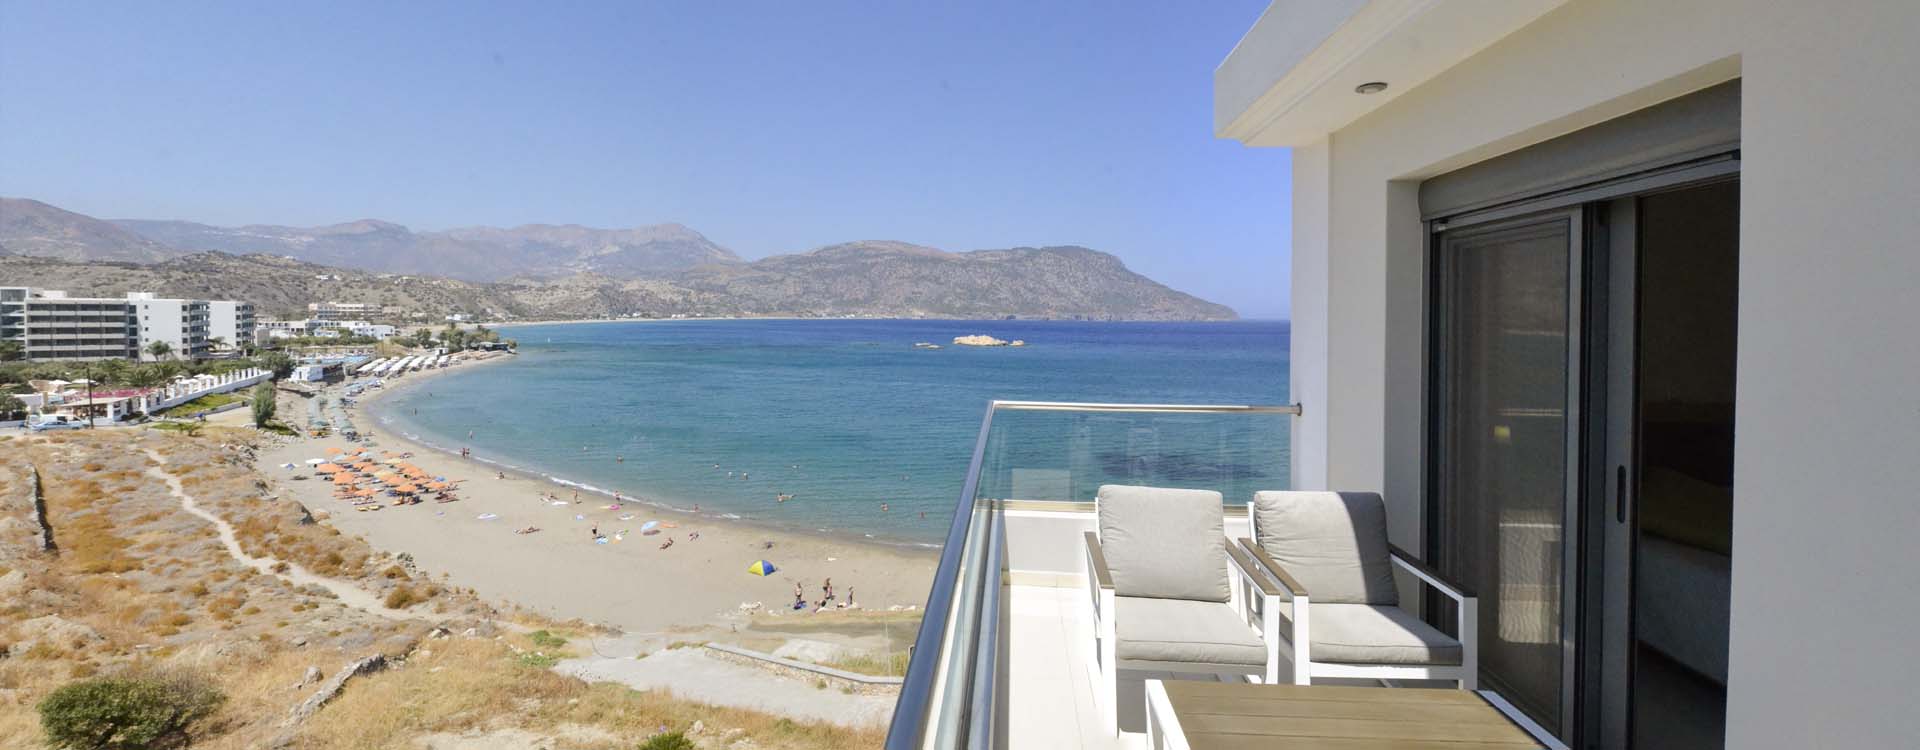 Ideal for self catering holiday on the island of Karpathos